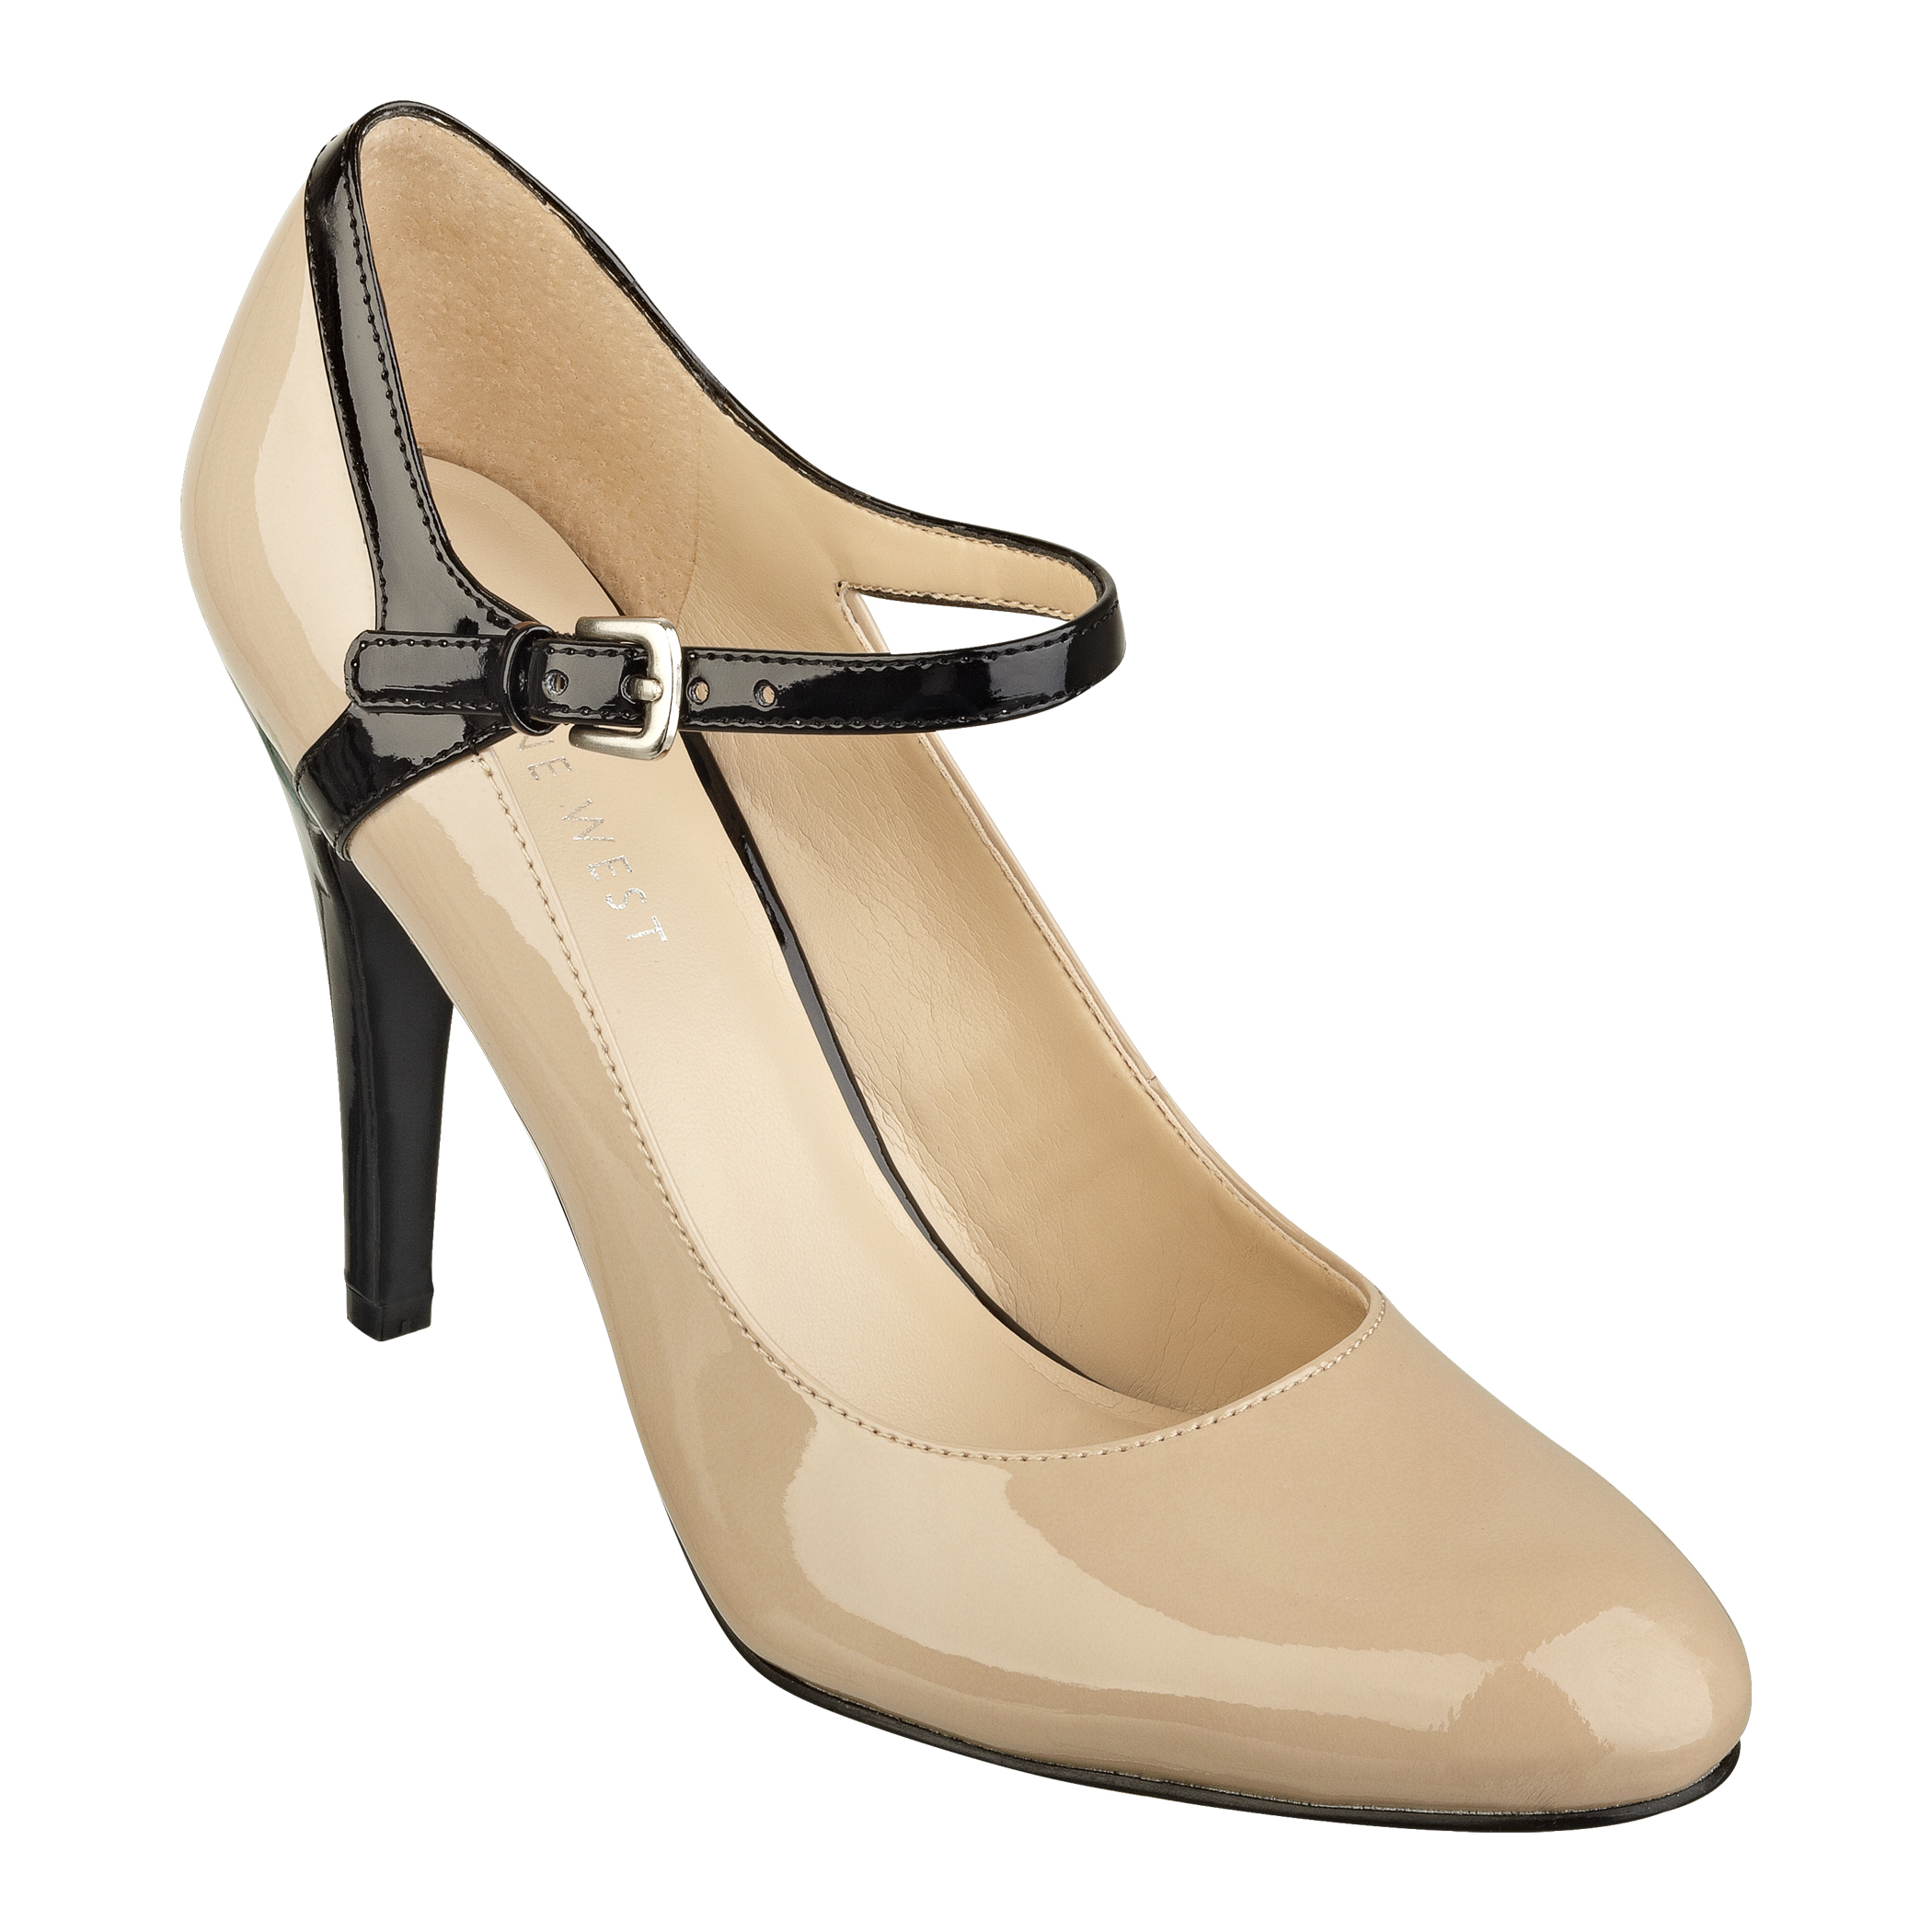 Lyst - Nine West Sweetness Mary Jane Pump in Natural